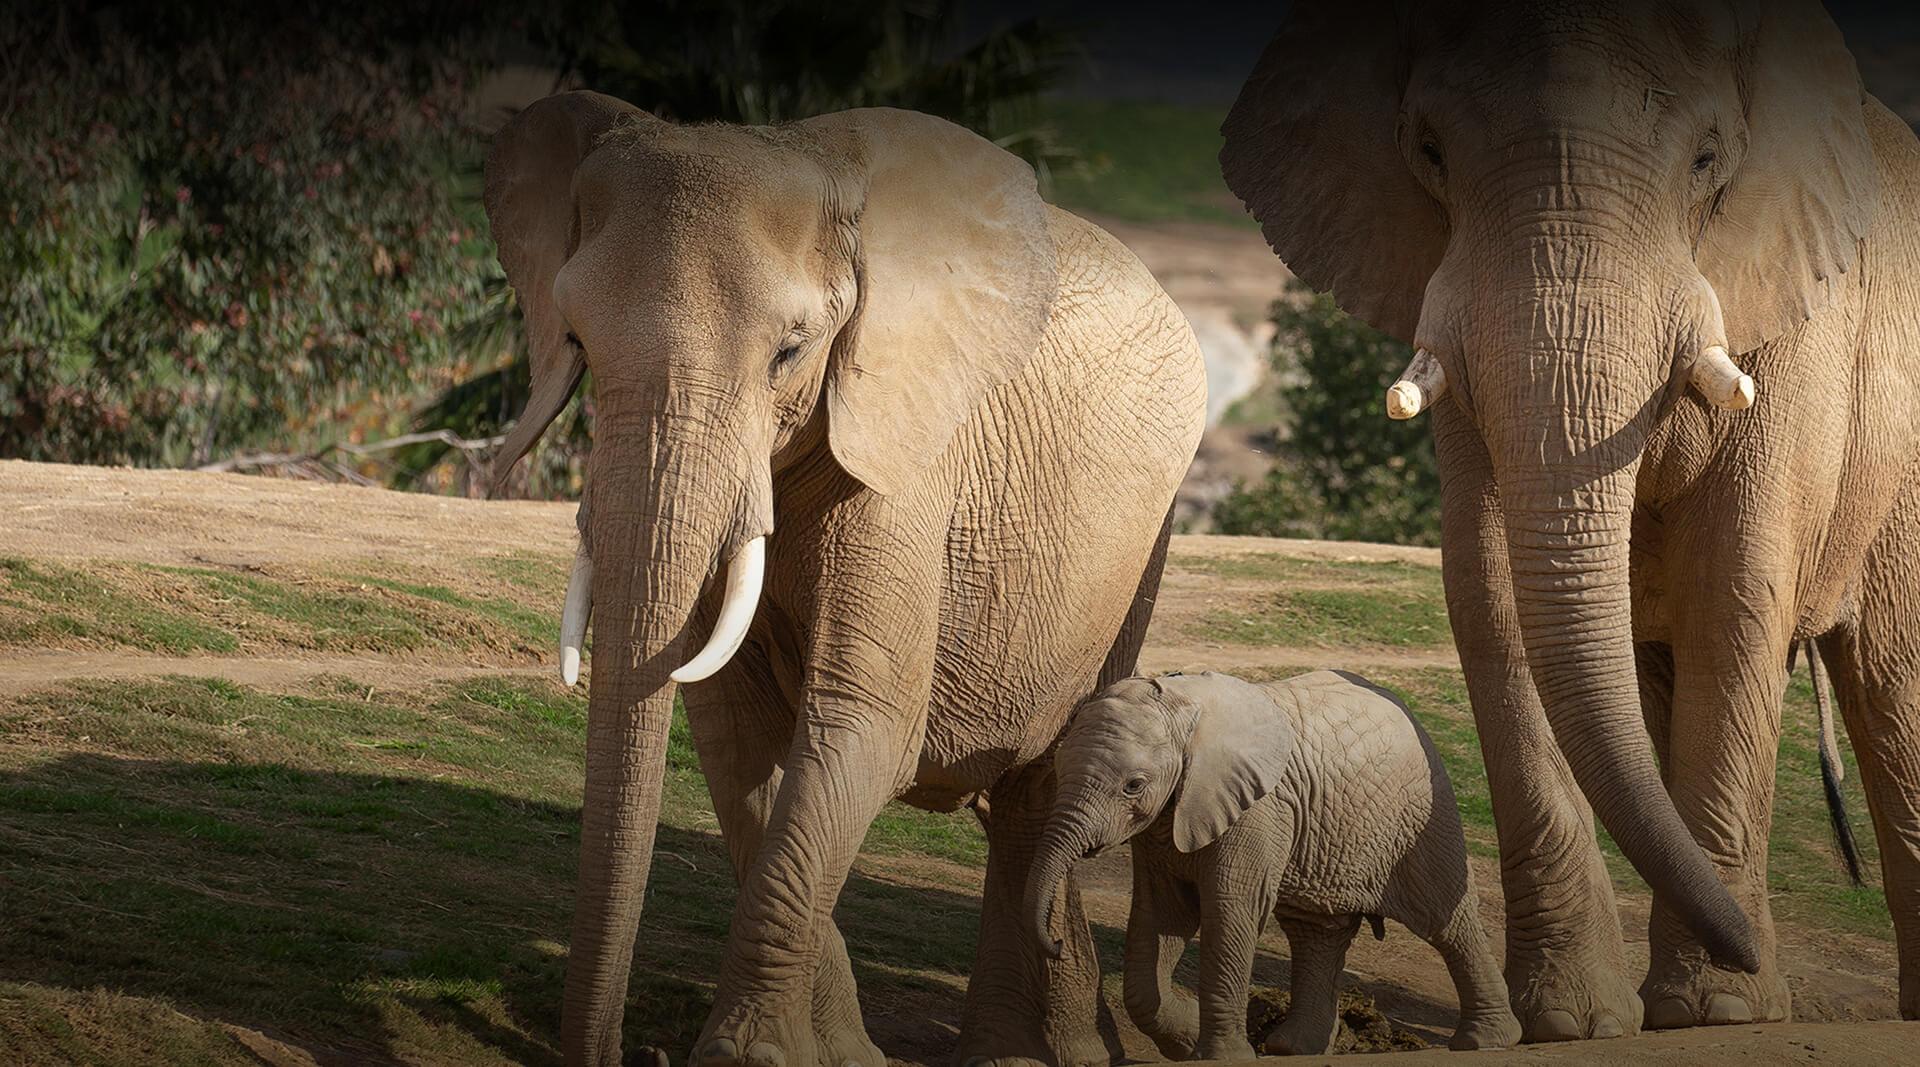 Two African elephants surrounding a small calf.